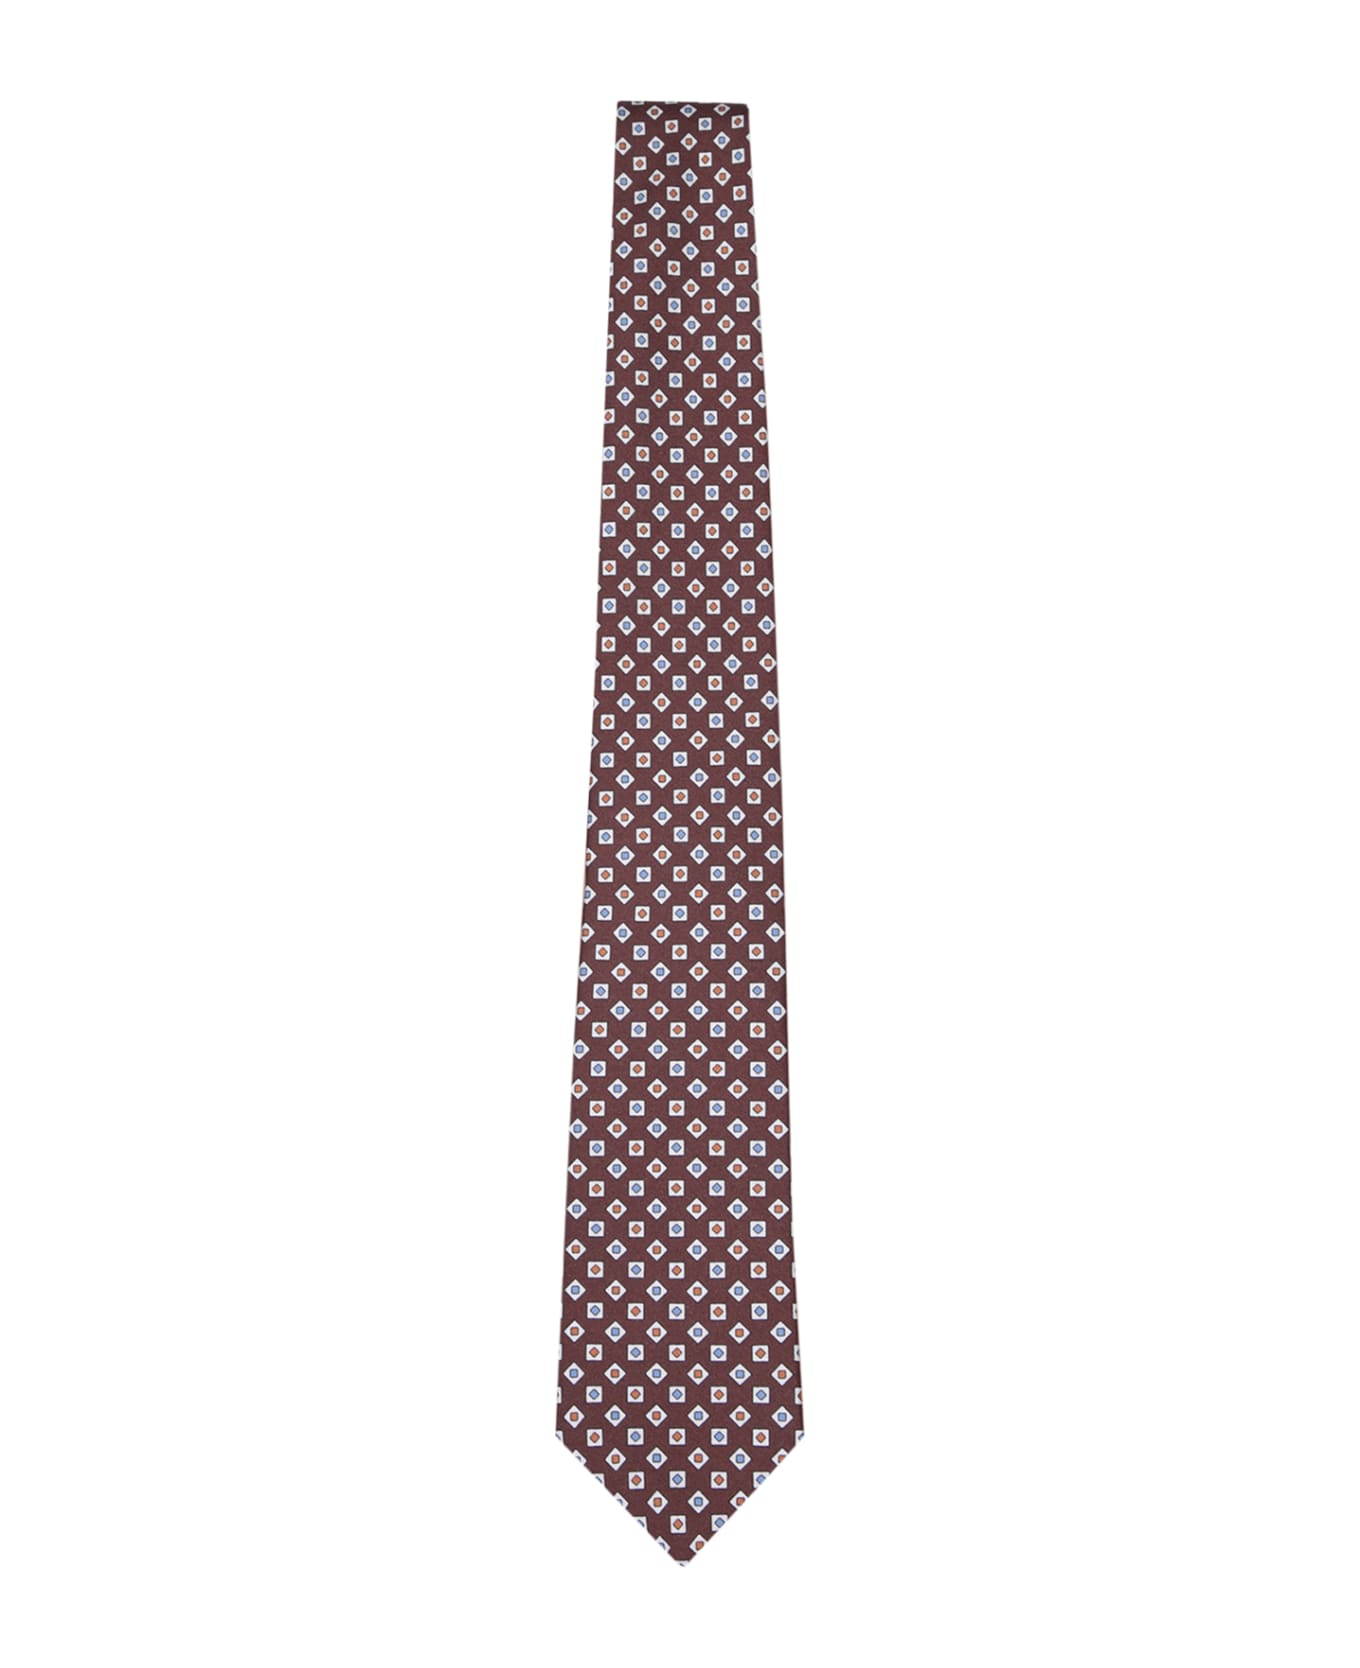 Canali Patterned Multicolor/brown Tie - Blue